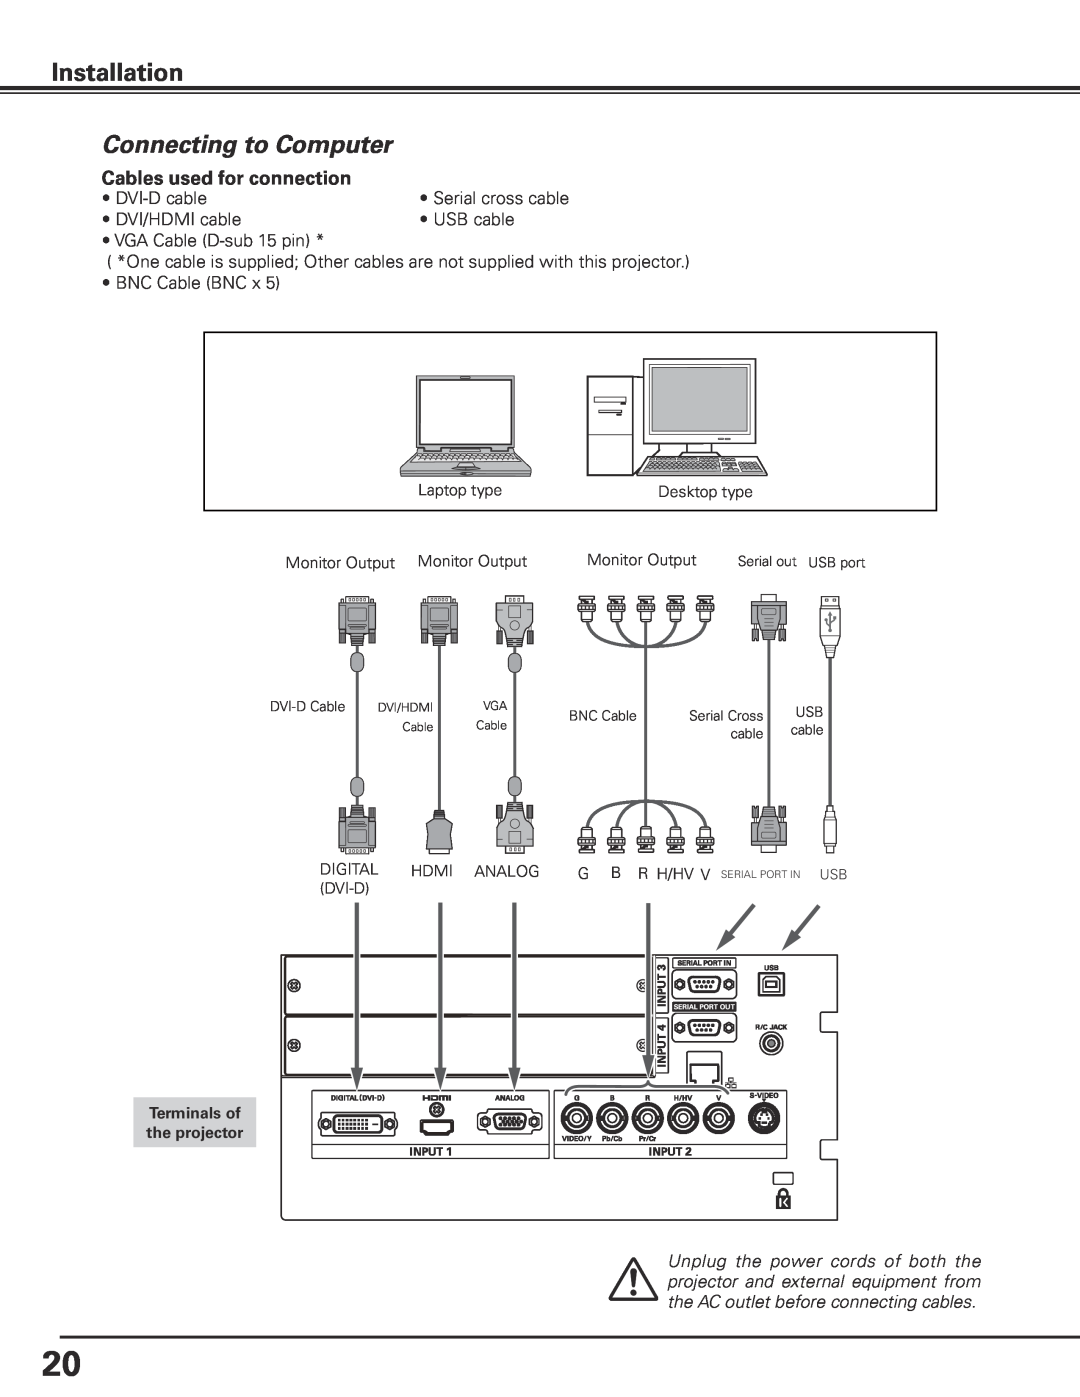 Sanyo HF15000L owner manual Connecting to Computer, Installation, Cables used for connection, Terminals of the projector 